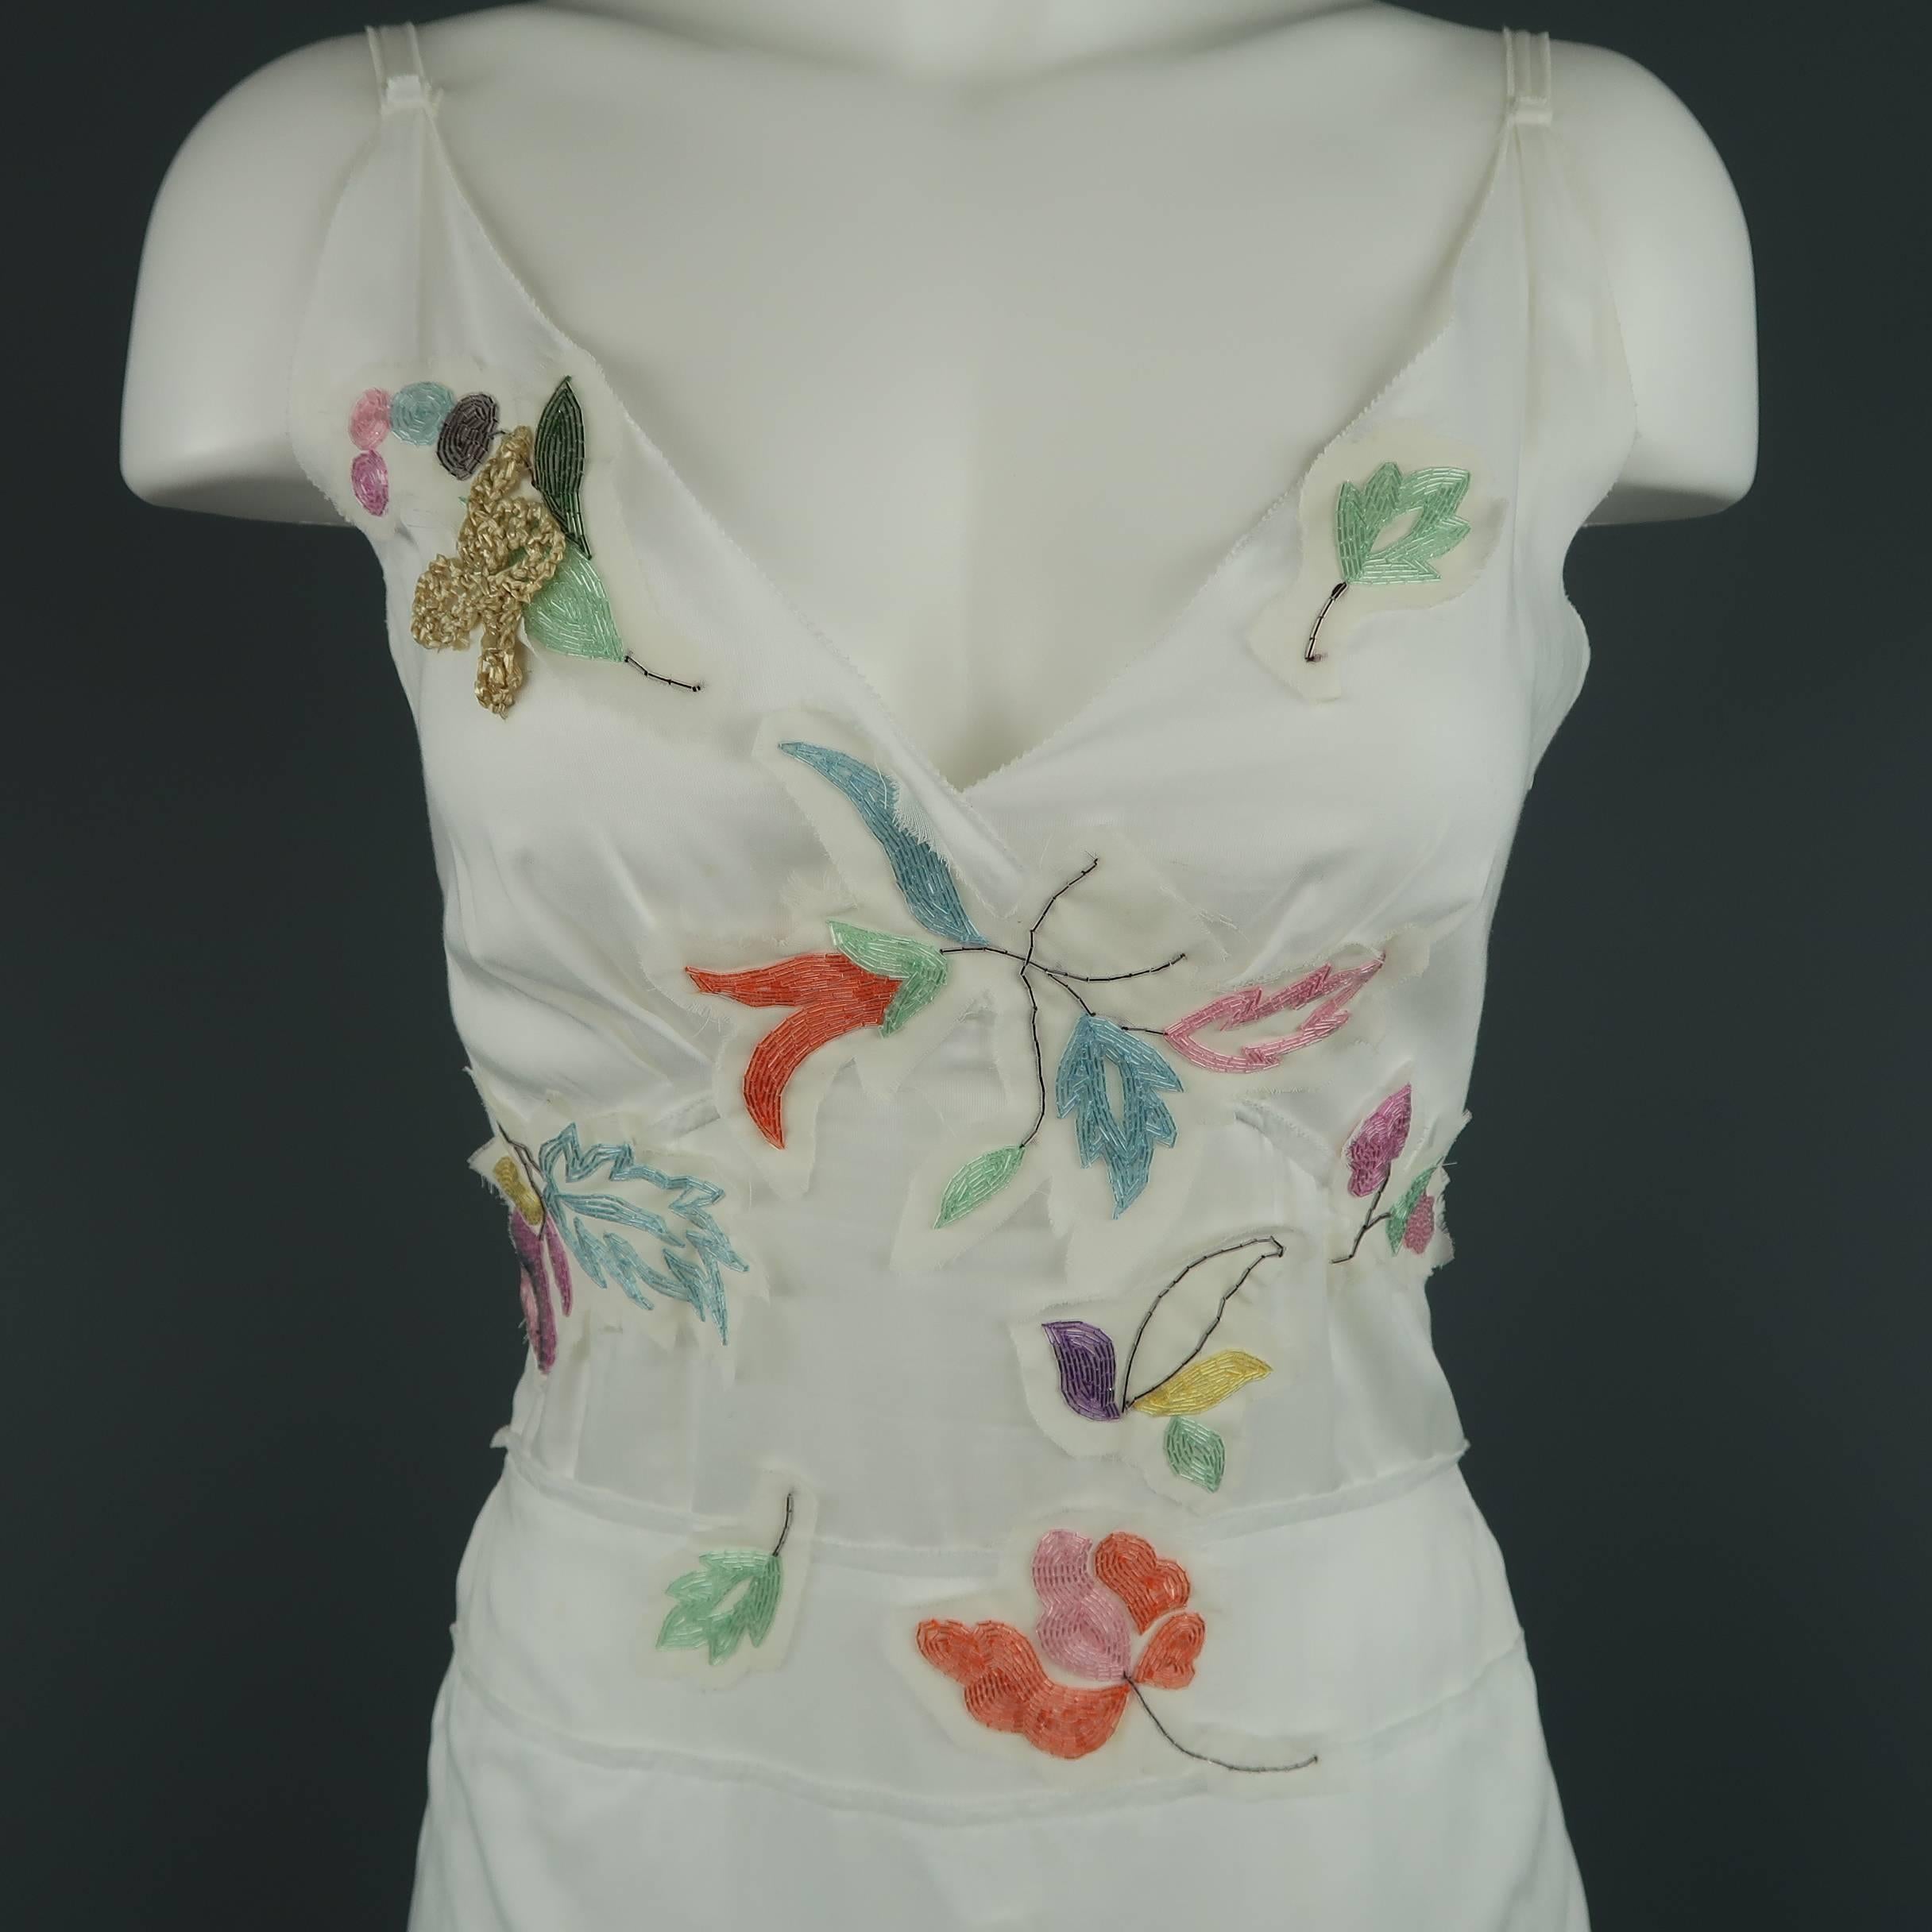 PRADA sun dress comes in white cotton muslin with spaghetti straps, camisole top, layered A line skirt with tied back, and multi color beaded leaf patches. Made in Italy.
 
Excellent Pre-Owned Condition.
Marked: IT 42
 
Measurements:
 
Shoulder: 14